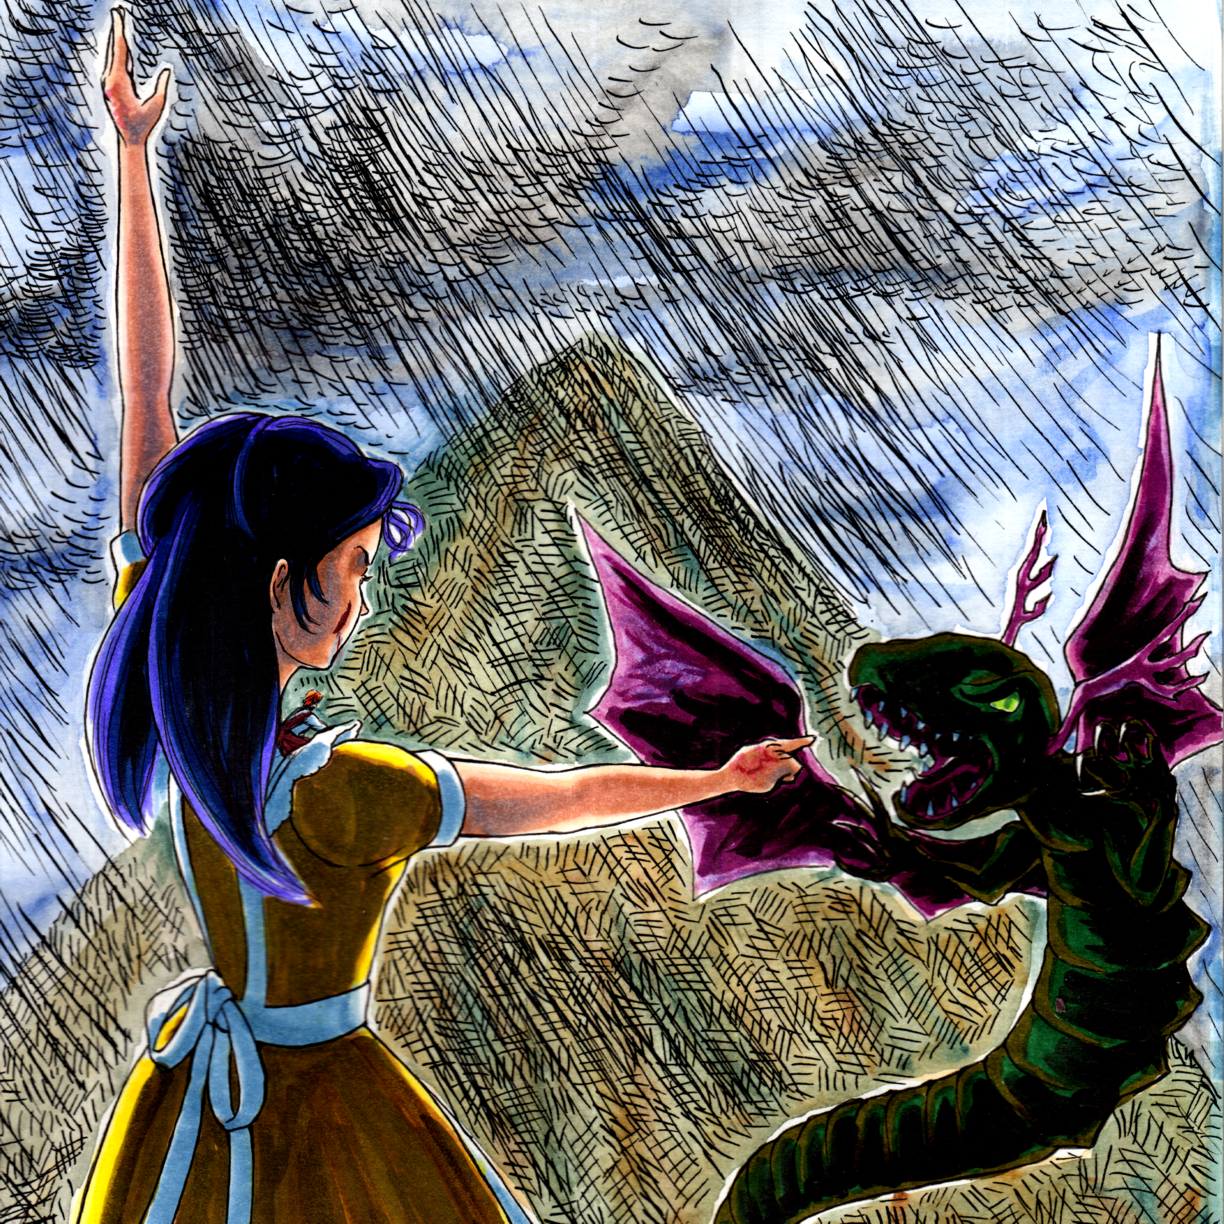 Dragon of the Depths vs Girl a mile high 4 episode cover